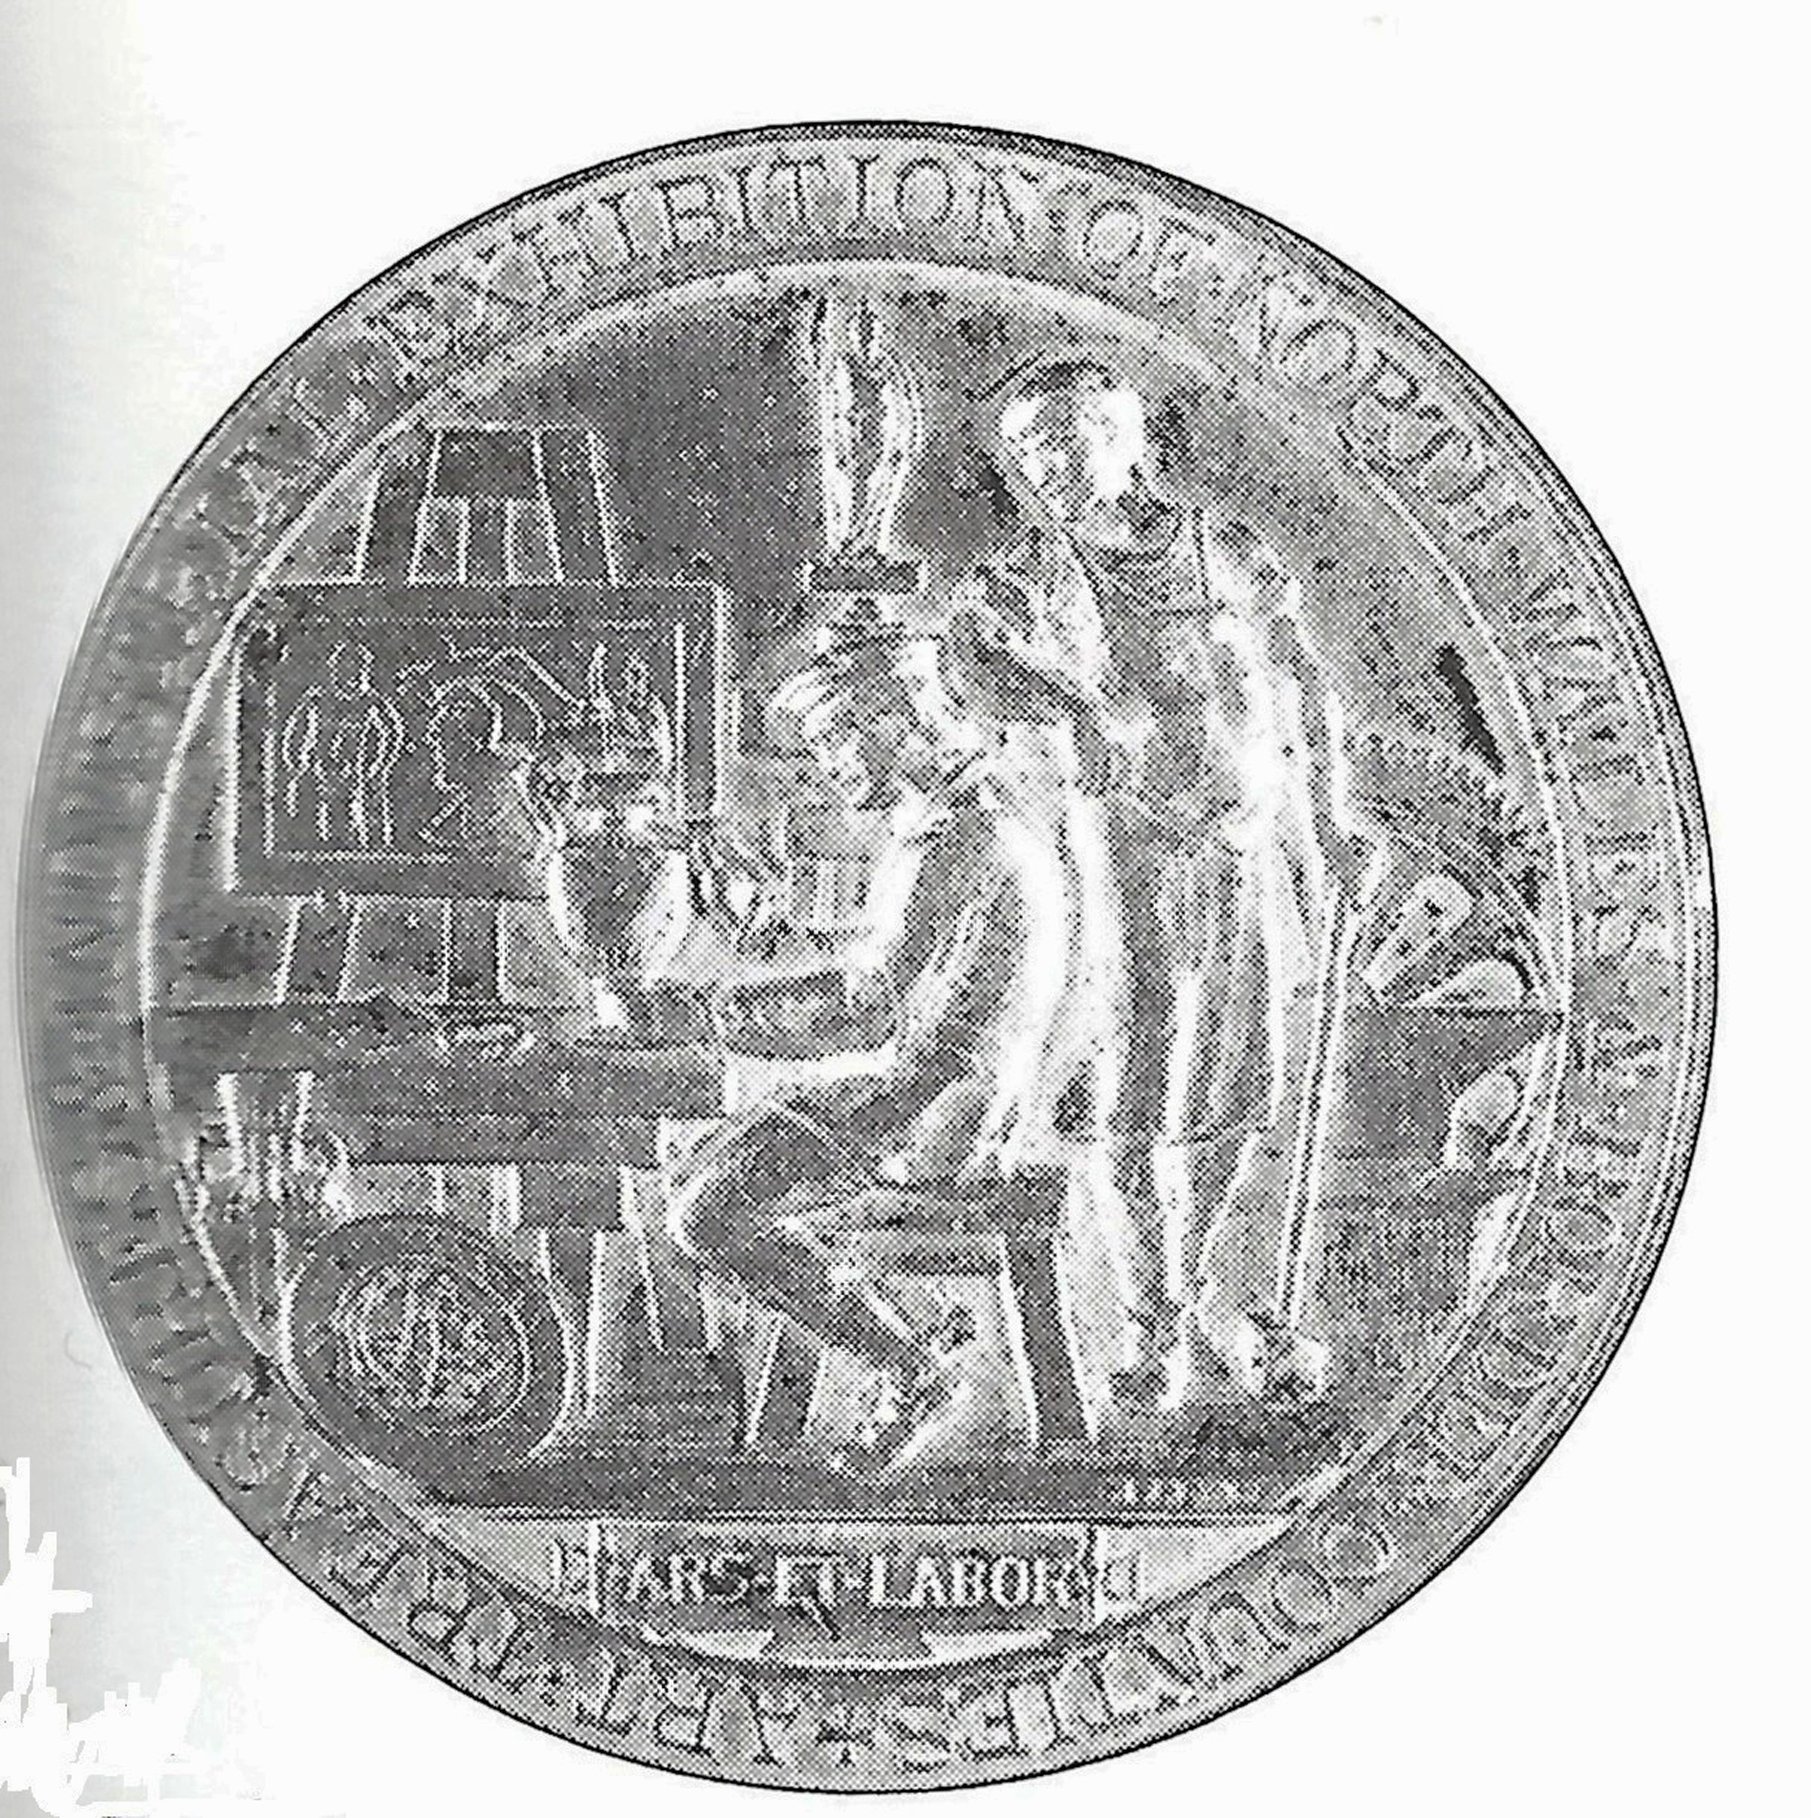 The medallion struck for the Exhibition, on the obverse it depicts a potter at work watched by a blacksmith. Image courtesy of Phil Phillips